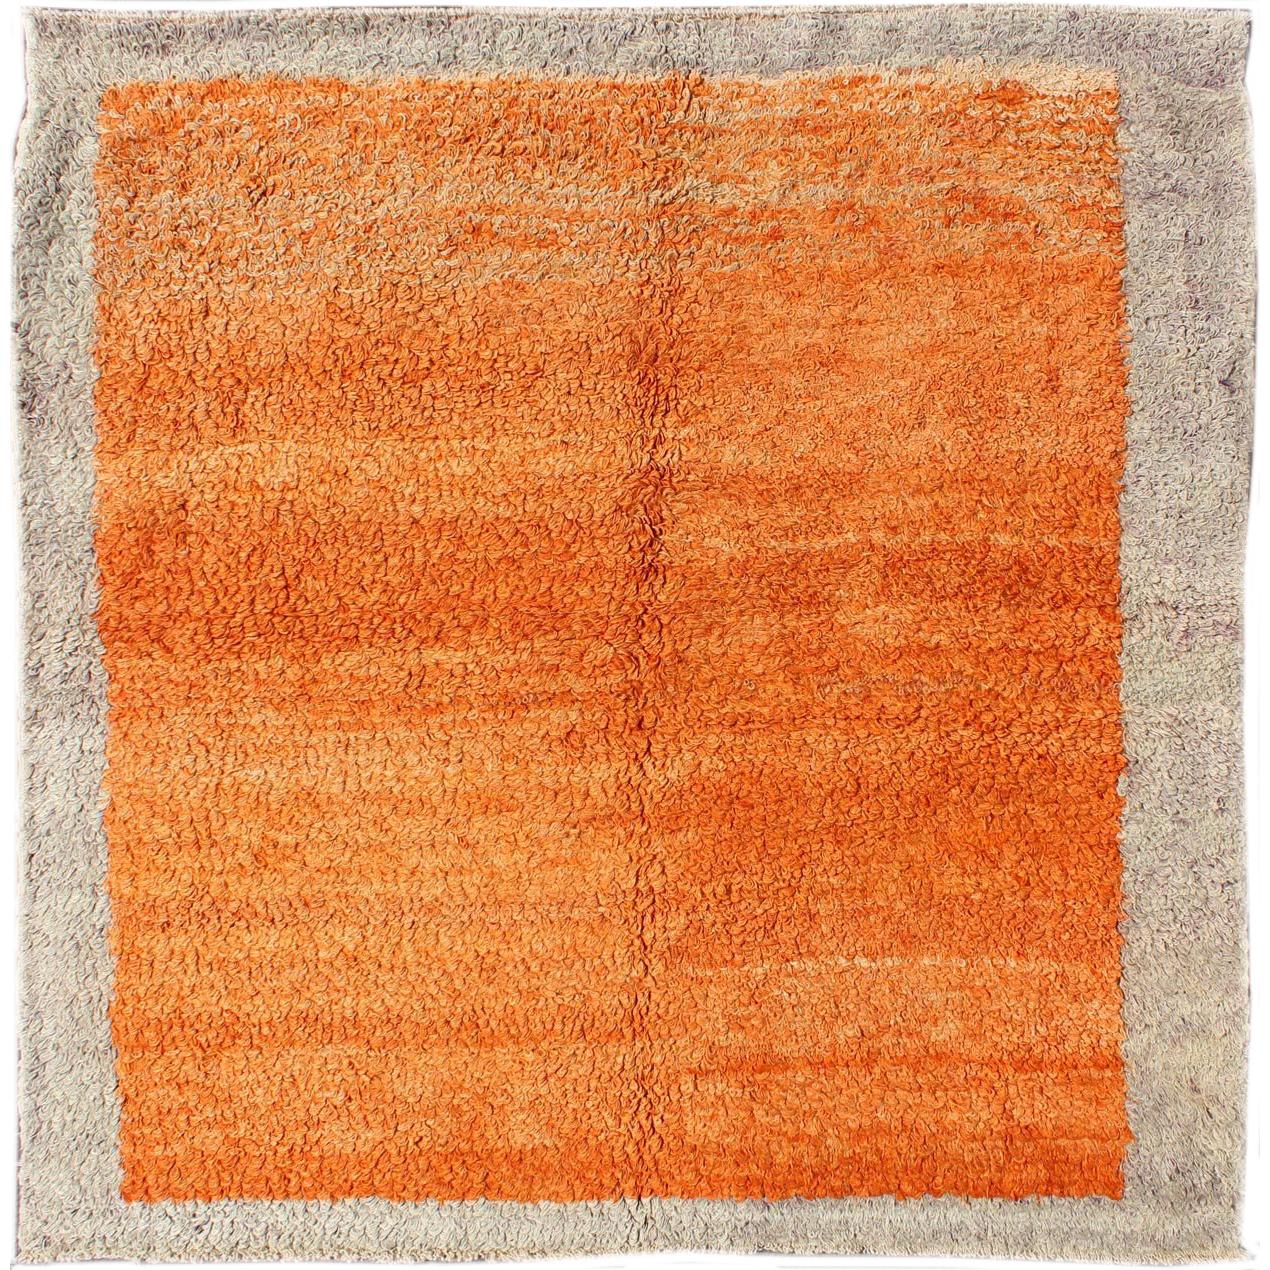 Squared Size Vintage Tulu with Minimalist Design Rug in Solid Orange and Taupe